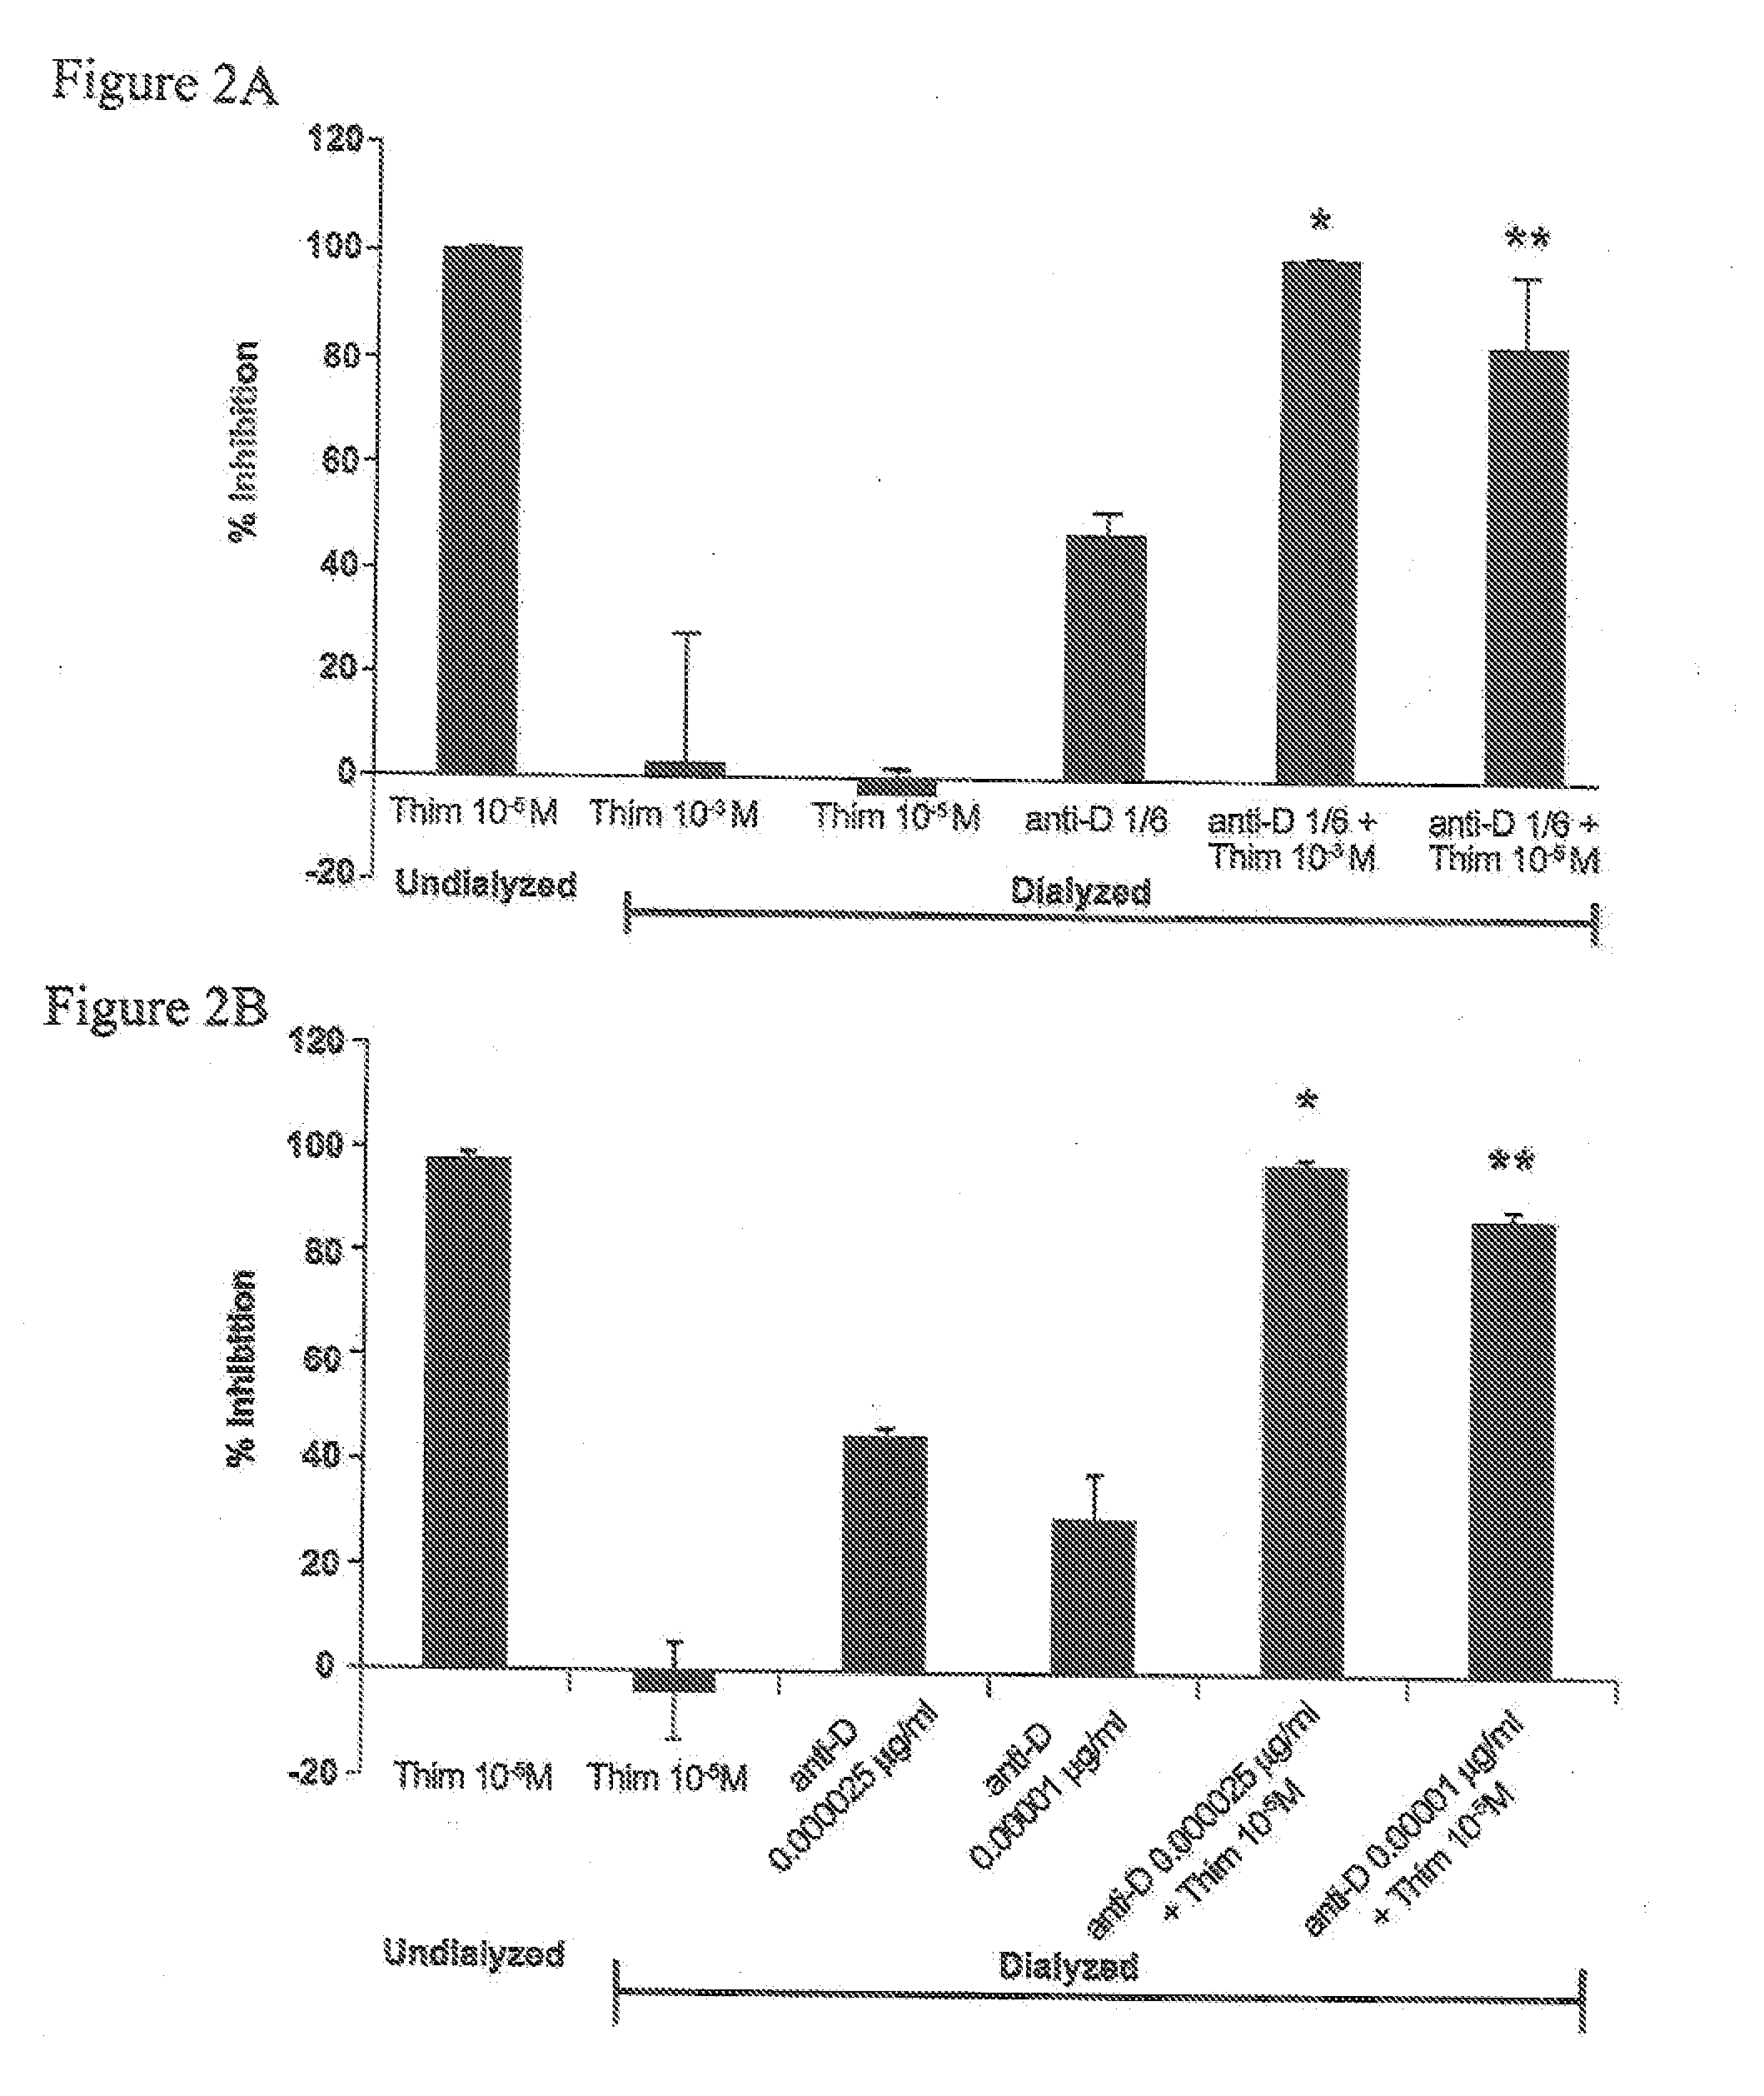 Nitrophenyls and related compounds and thimerosal for the inhibition of immune related cell or tissue destruction